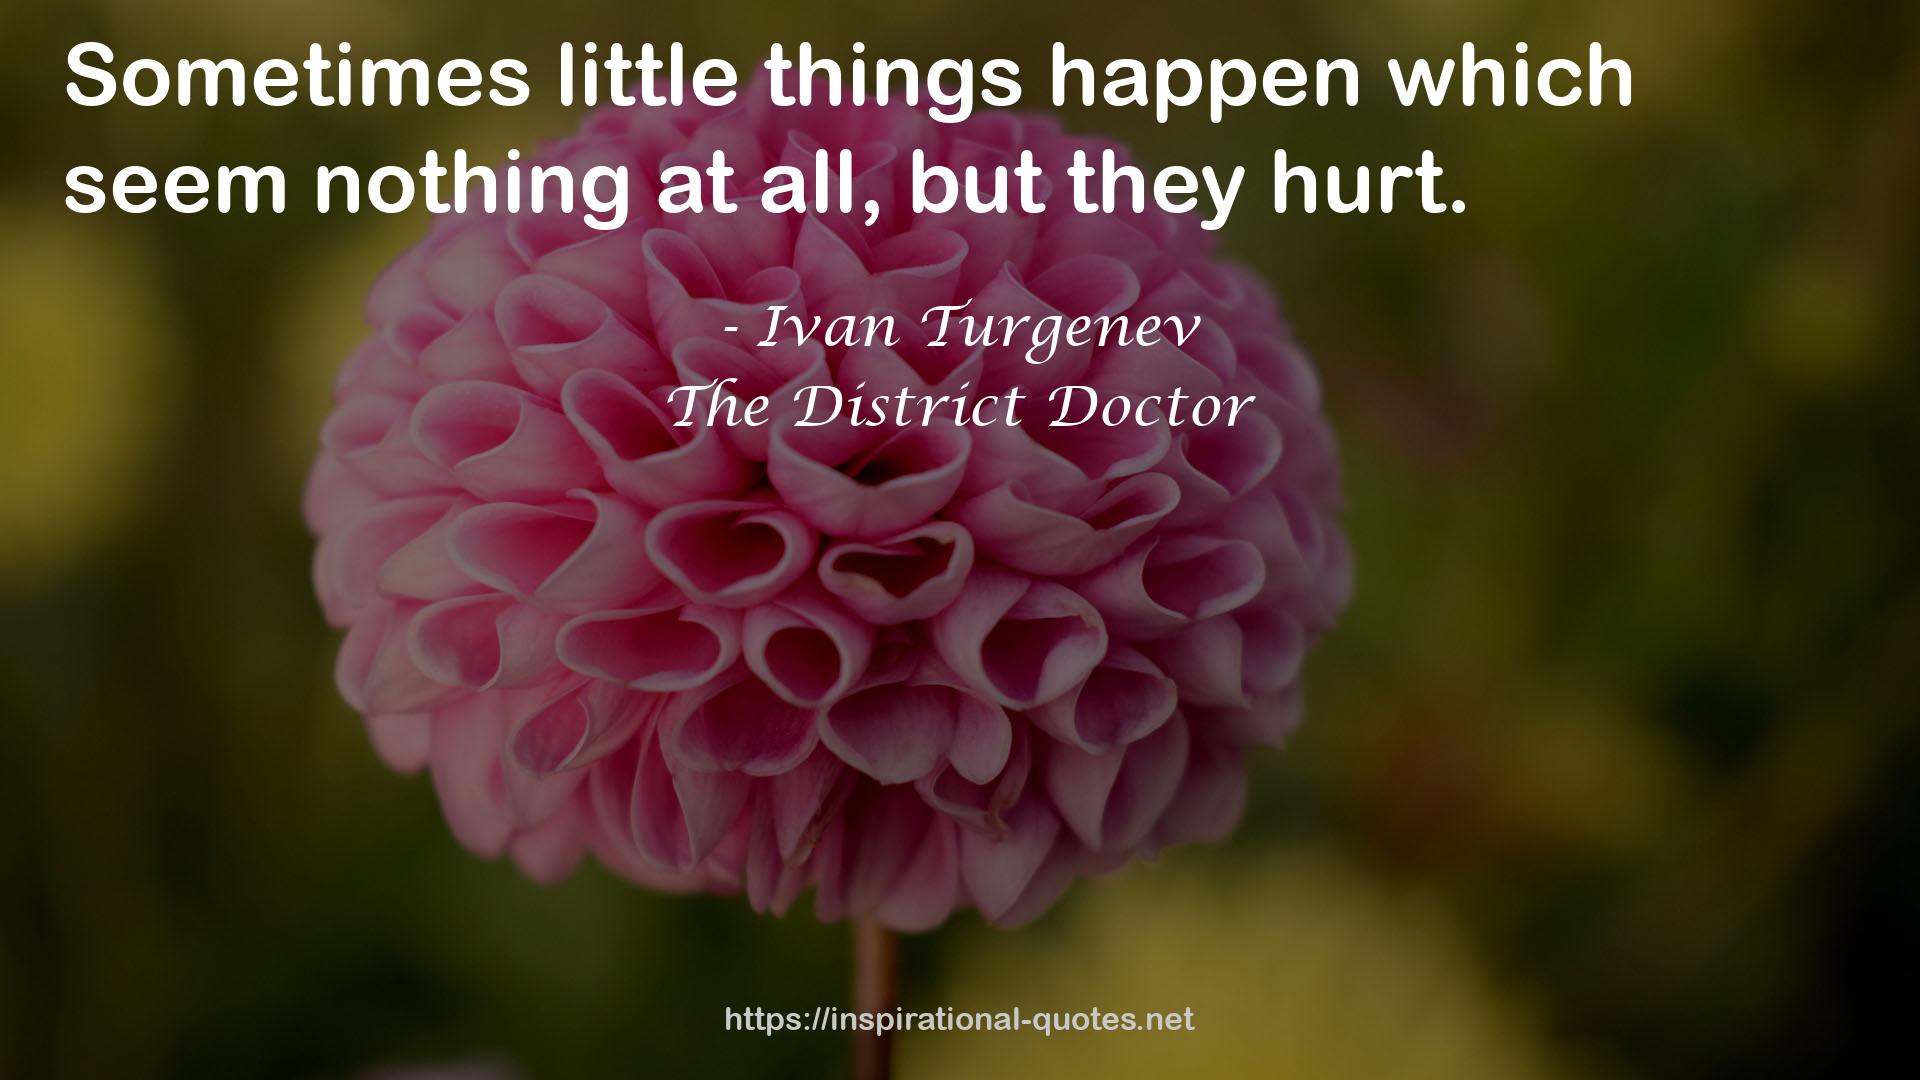 The District Doctor QUOTES